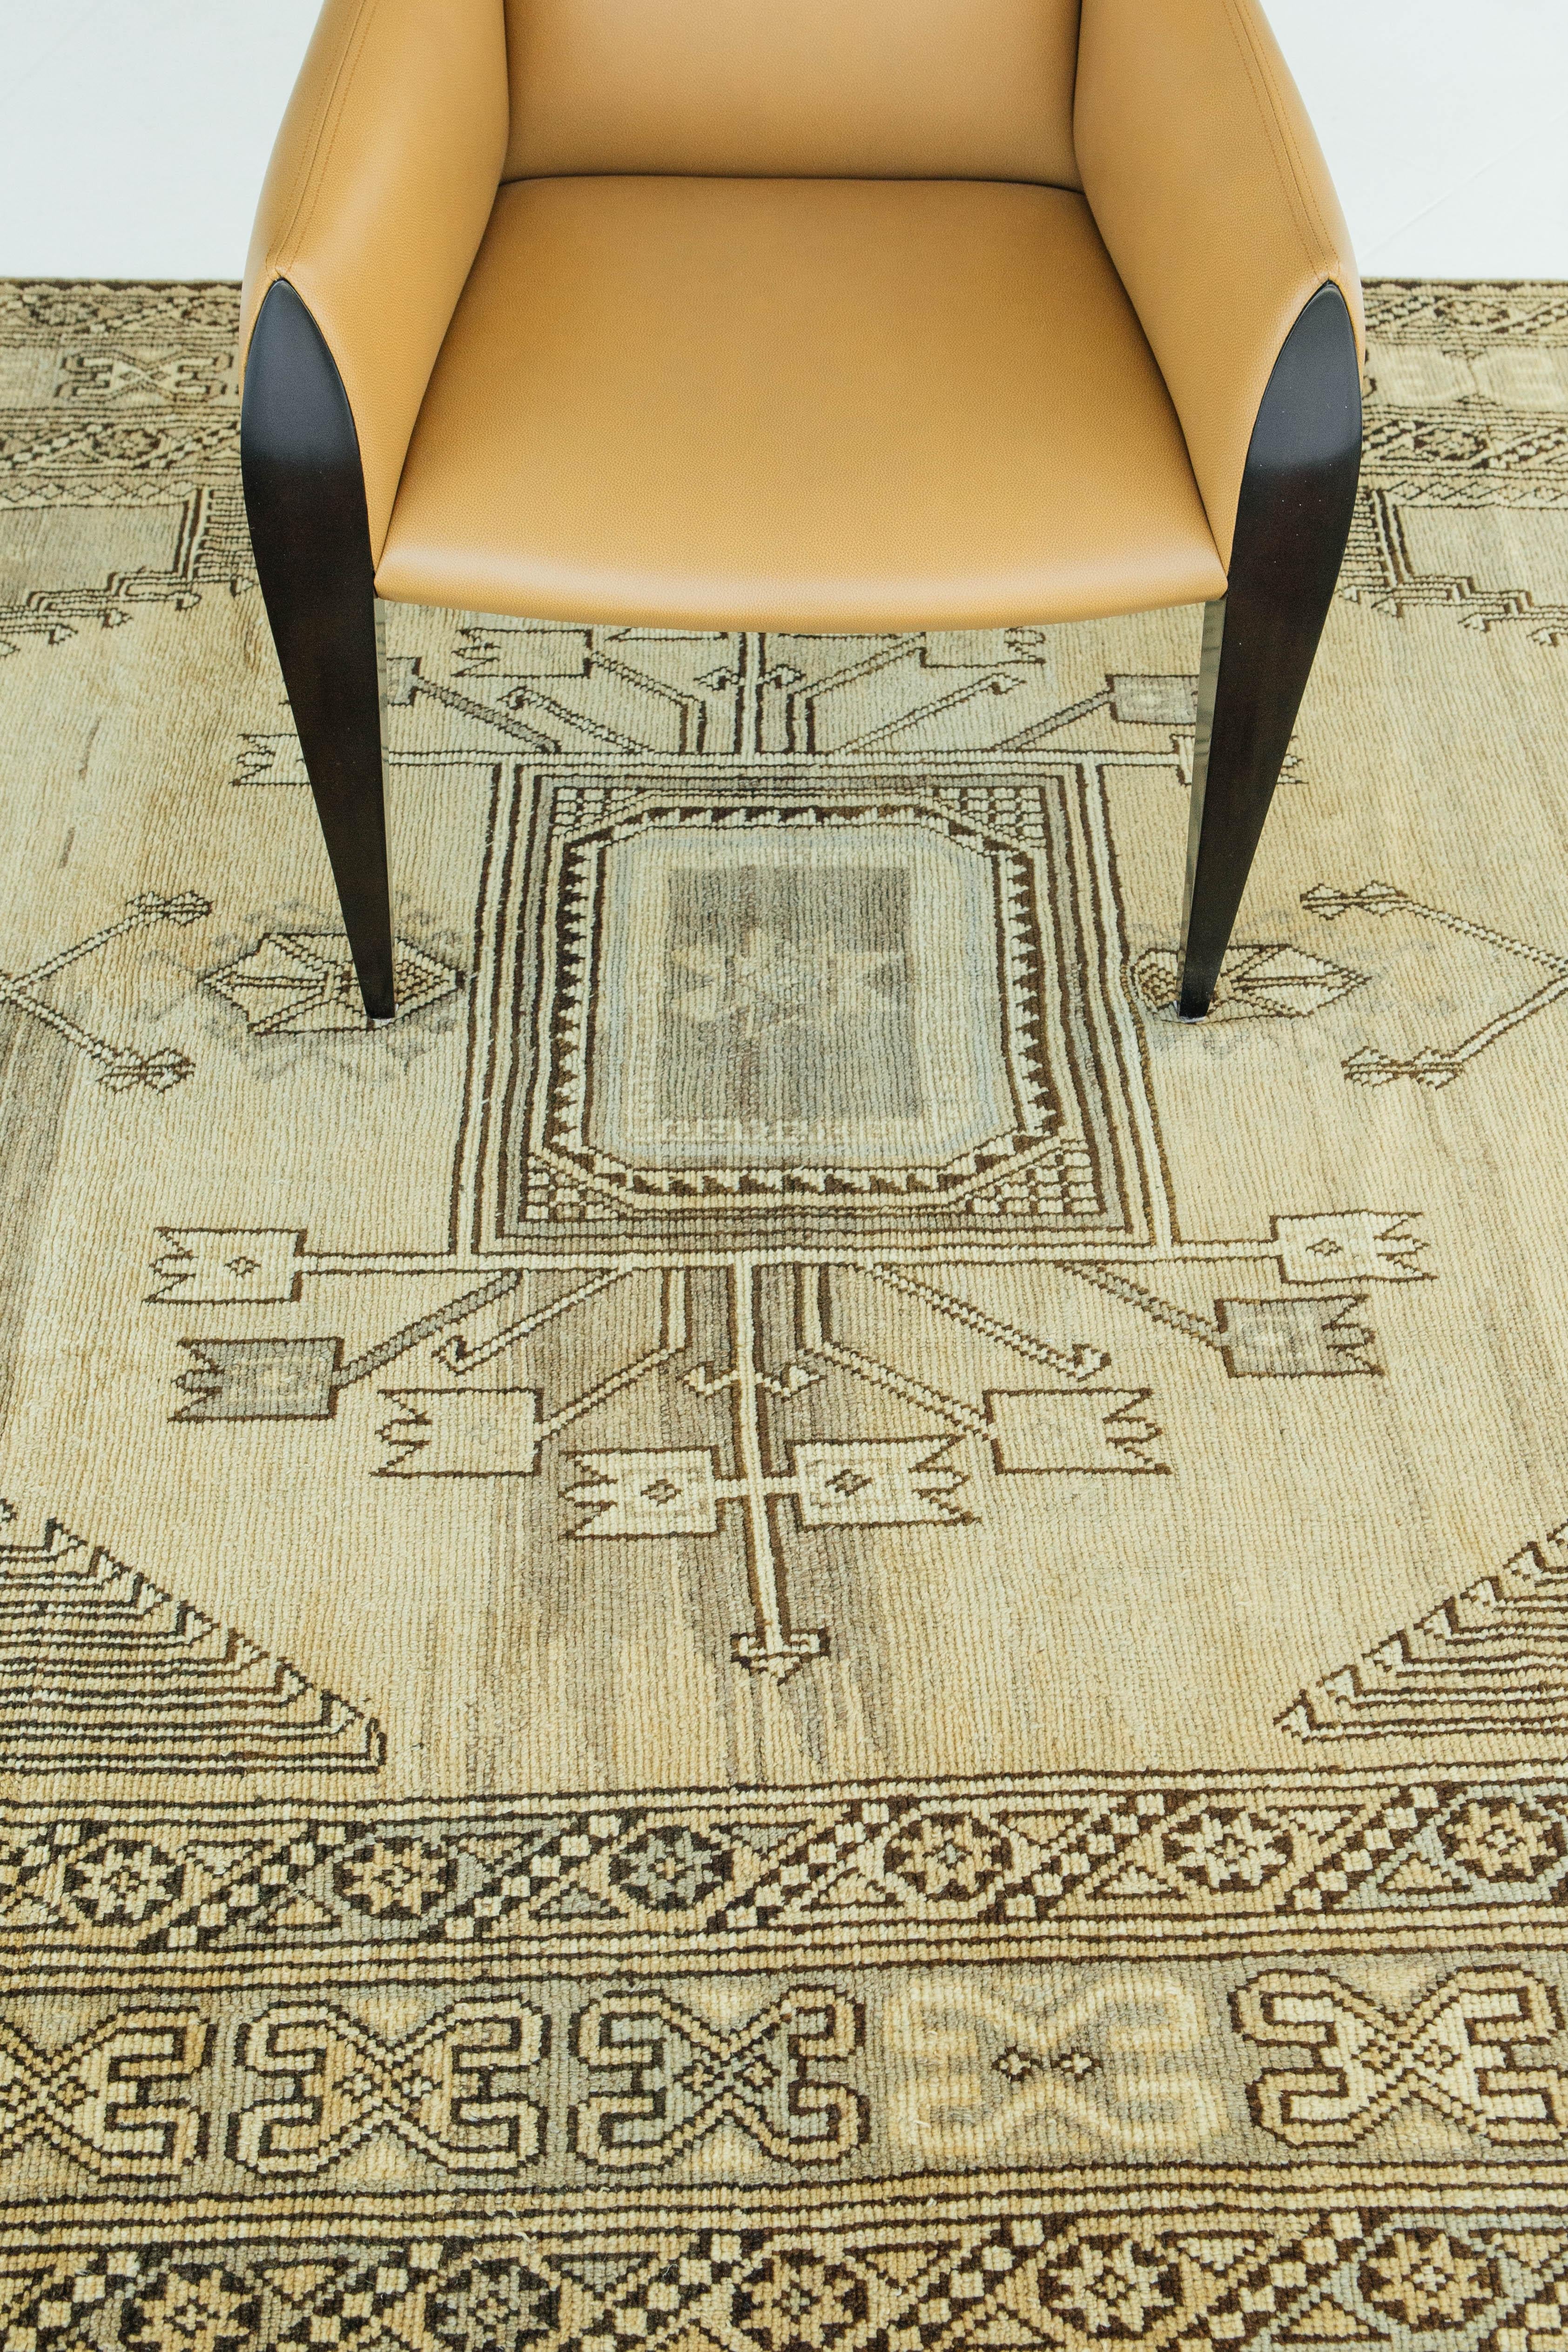 Vintage Turkish Anatolian rugs weave together dyes and colours, motifs, textures and techniques that are popular in Anatolia or Asia Minor. This piece is from the Ganakkale region. A central medallion and symmetric graphic motifs make a show